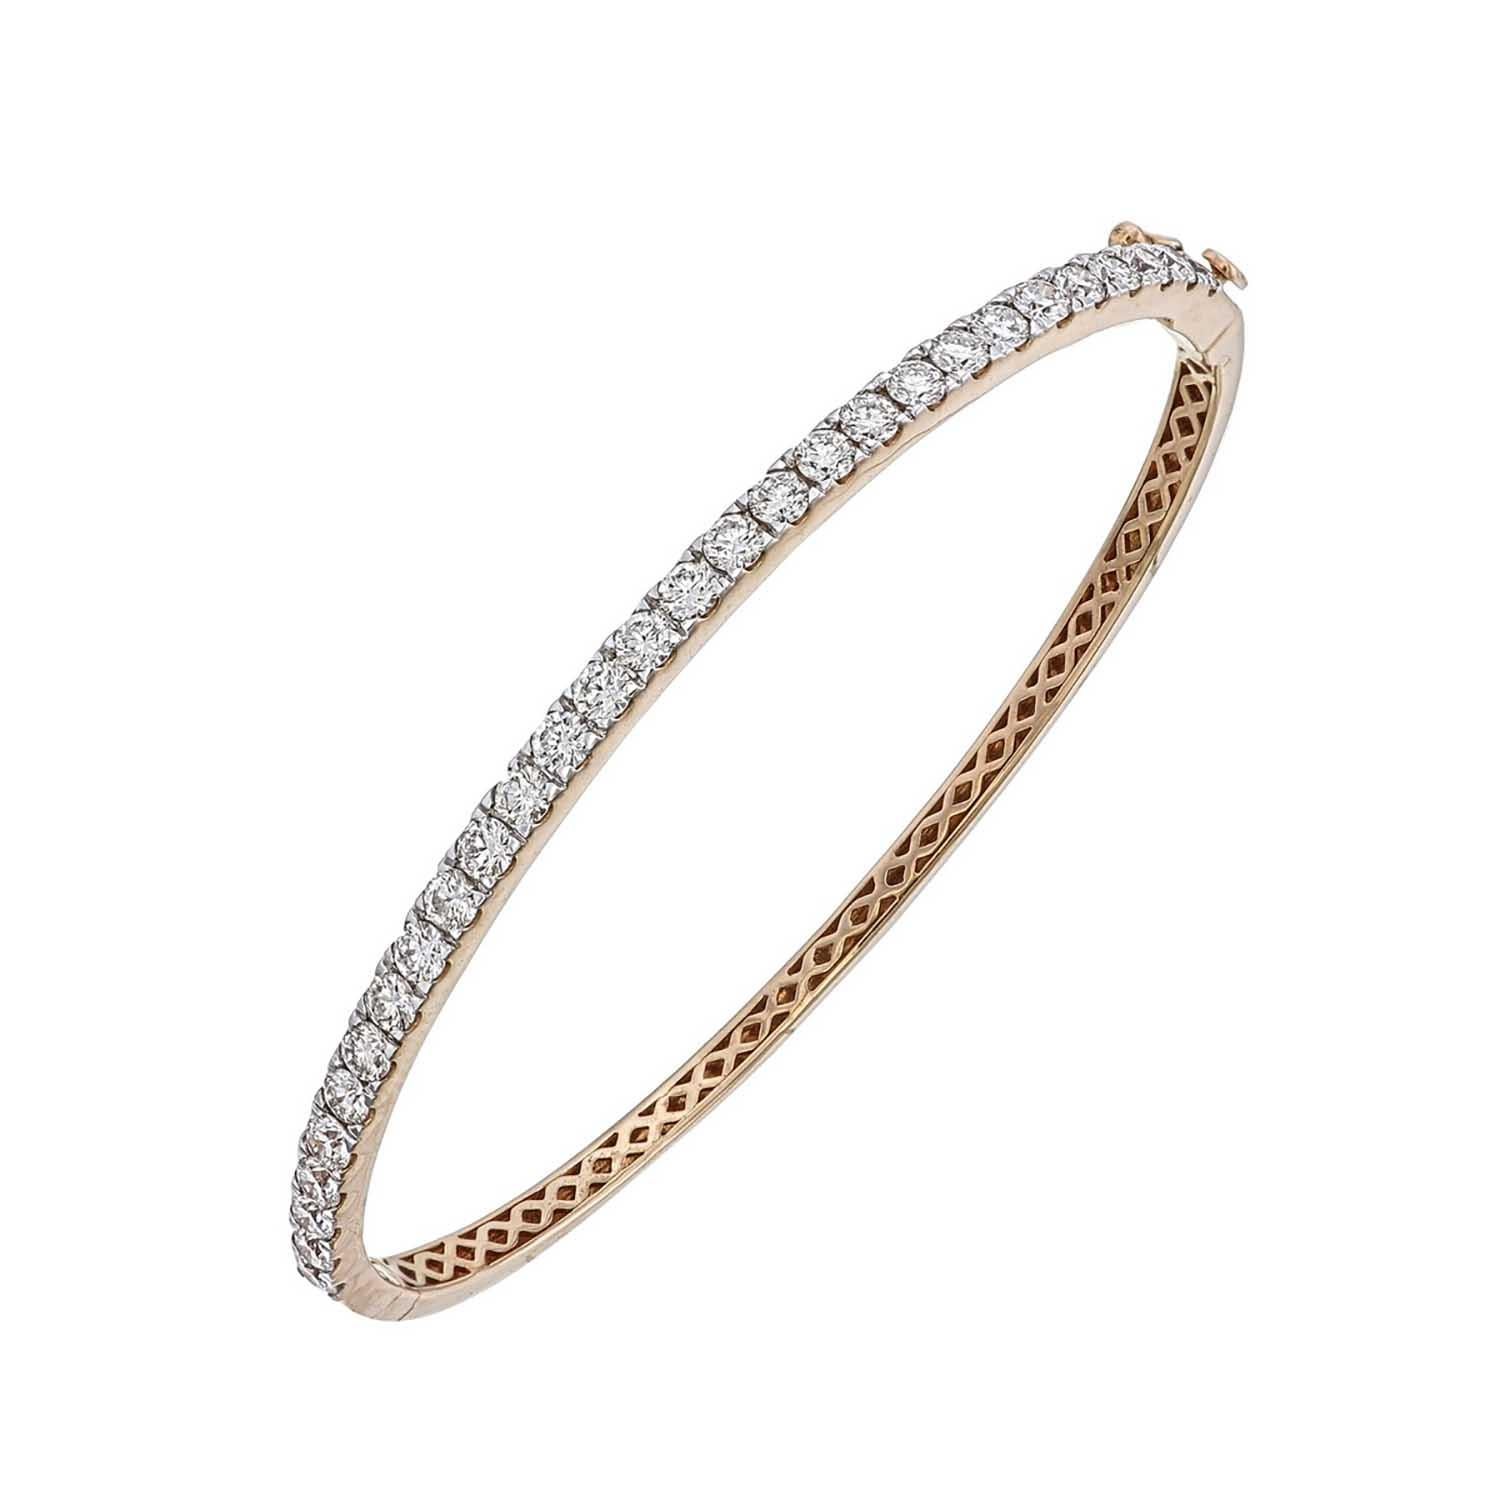 Diamond studded bangle with 29 pieces of 6 pointer each diamonds forming a total of 1.85 ct in total.
It is handmade using natural, untreated diamonds set in 18-karat gold.  the 

Its made in 18kt Rose gold with a safety lock making it very safe for